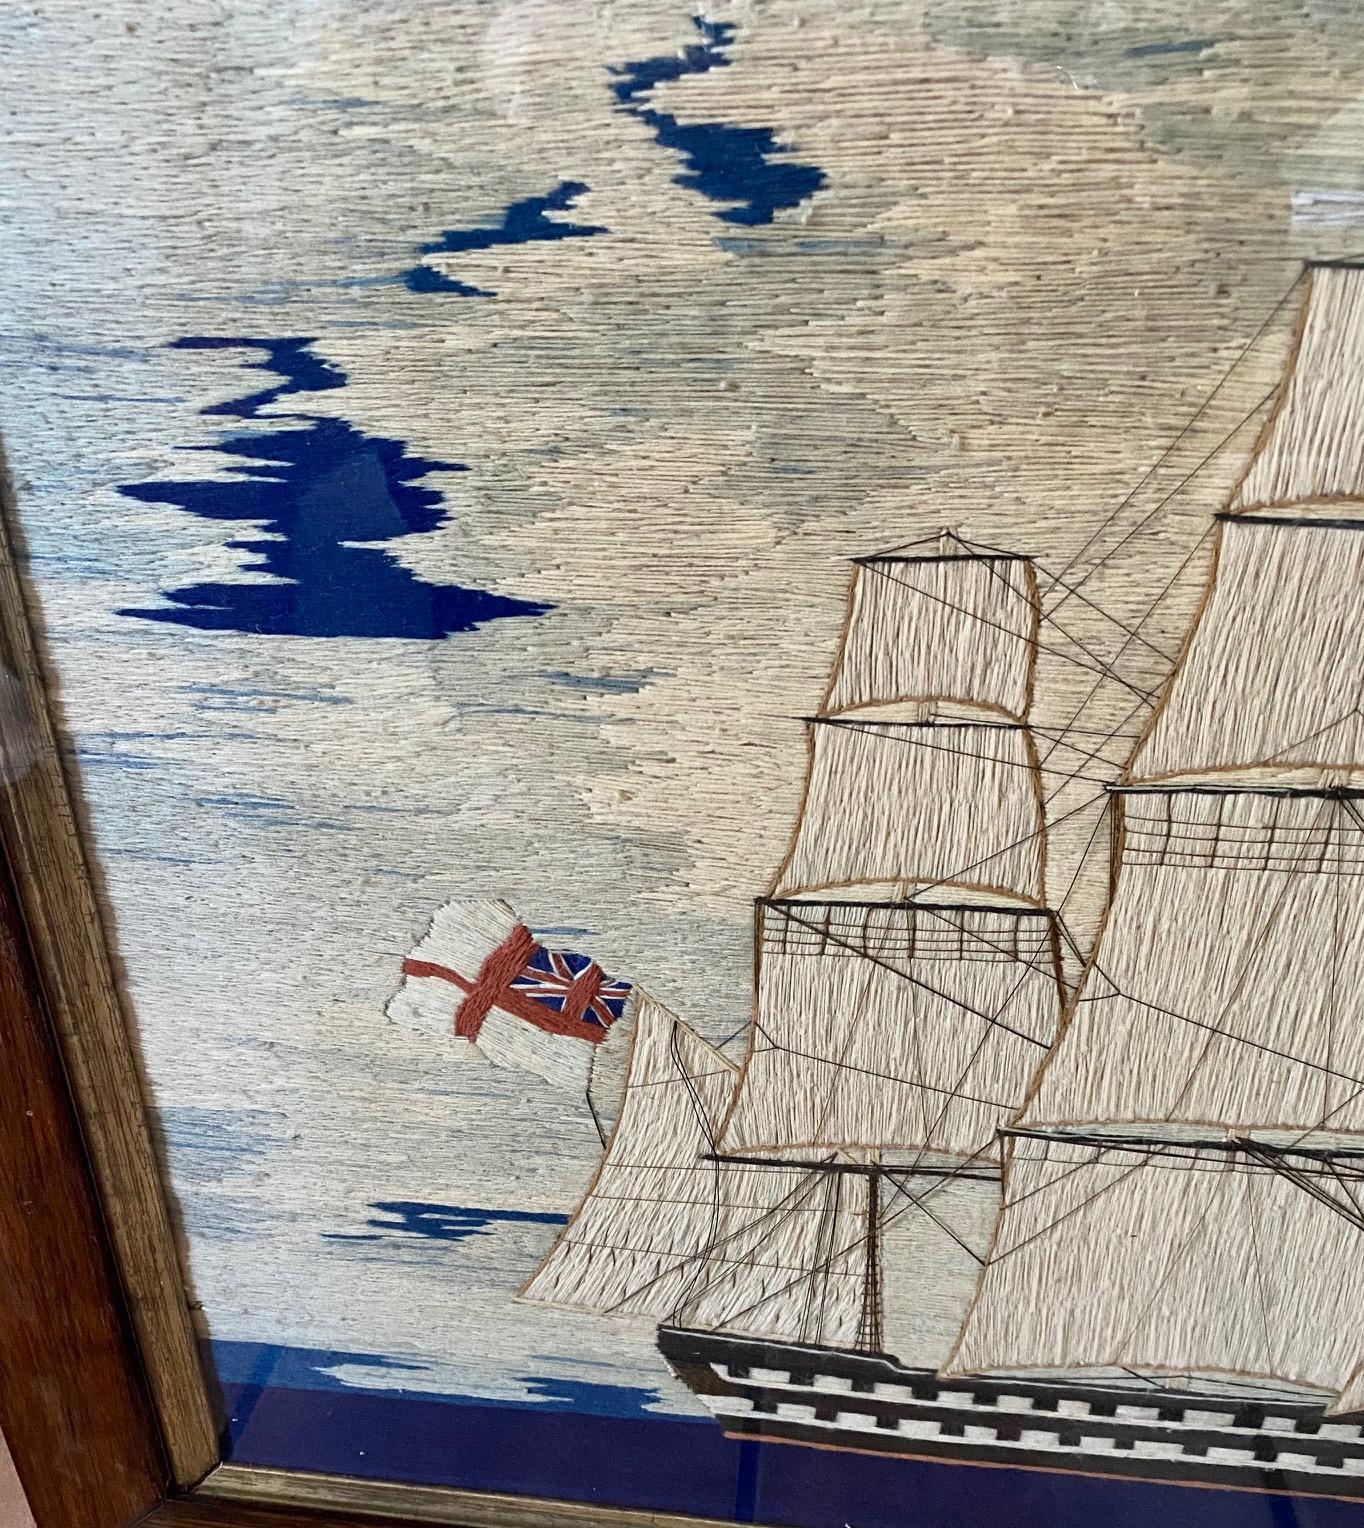 19th century Sailor's Woolie of a double decker ship of the line, circa 1870, a sailor's hand embroidered woolen yarn panel depicting a British naval ship with all sails set, flying the English St. Georges Cross and British White Ensign, under a